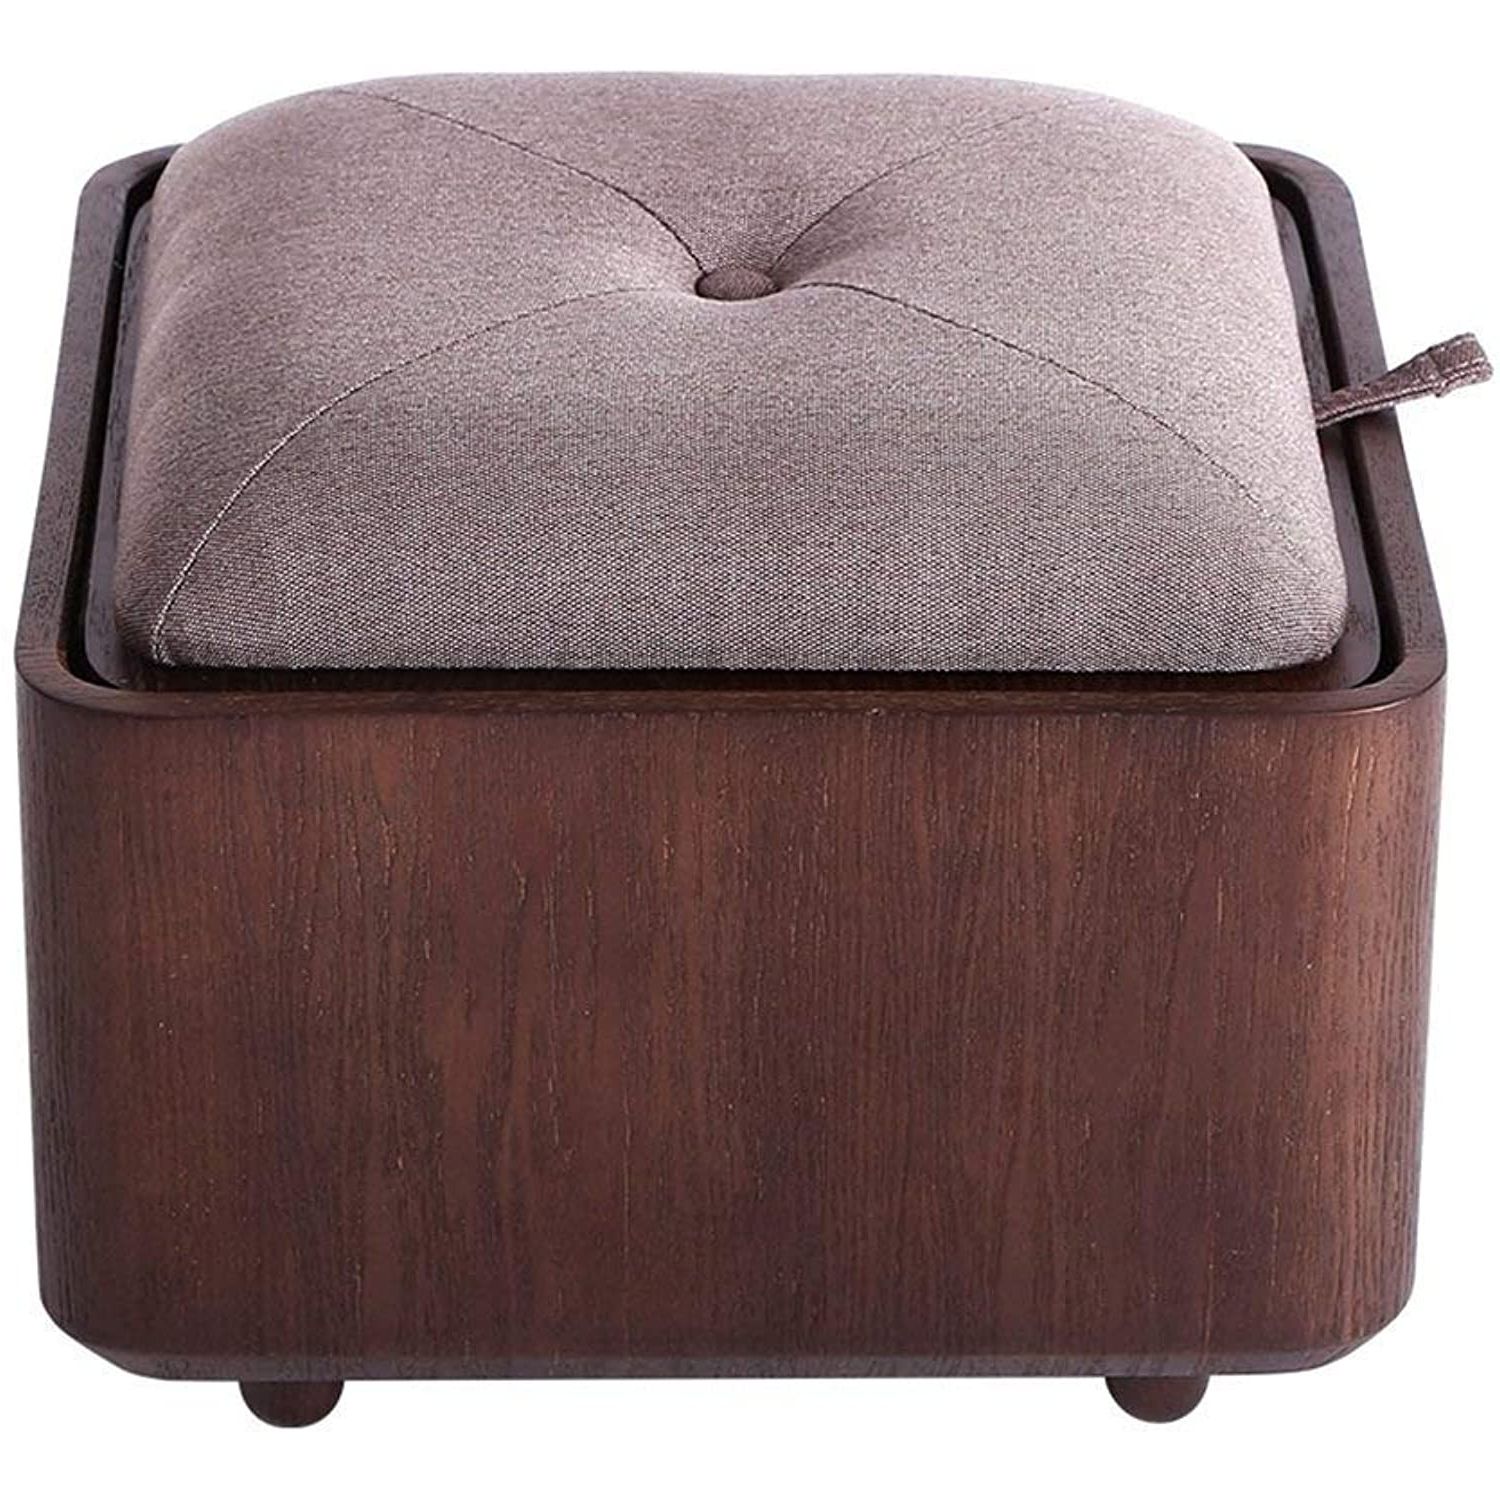 Black And Ivory Solid Cube Pouf Ottomans Pertaining To Most Recently Released Amazon: Thbeibei Ottomans Small Table Storage Ottoman Box Footrest (View 10 of 10)